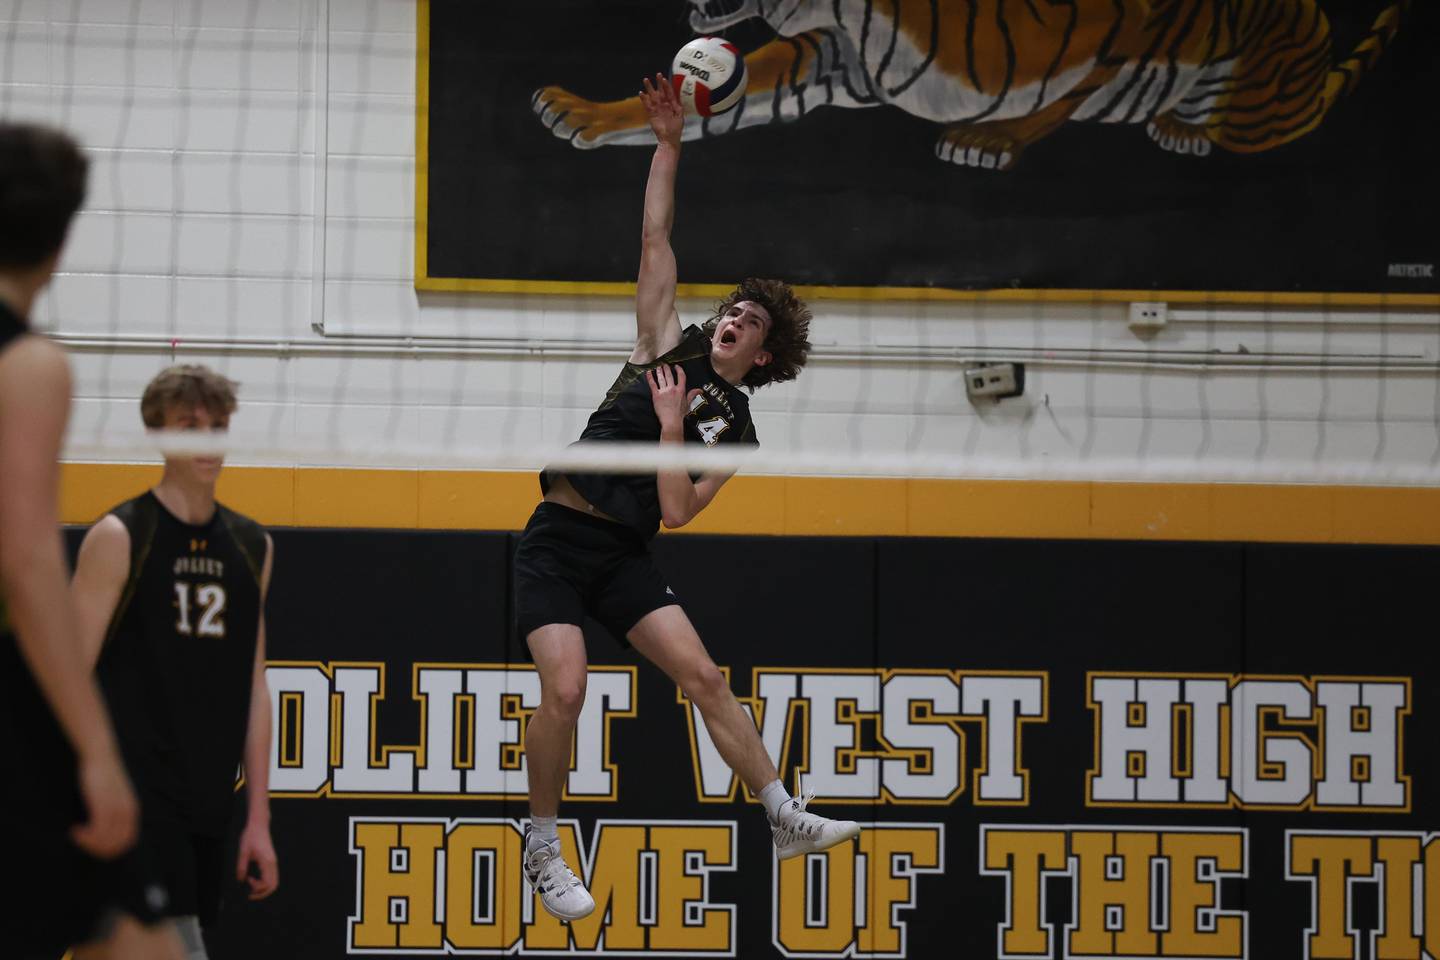 Joliet West’s Thomas Fellows serves against Providence on Thursday, March 23, 2023 in Joliet.